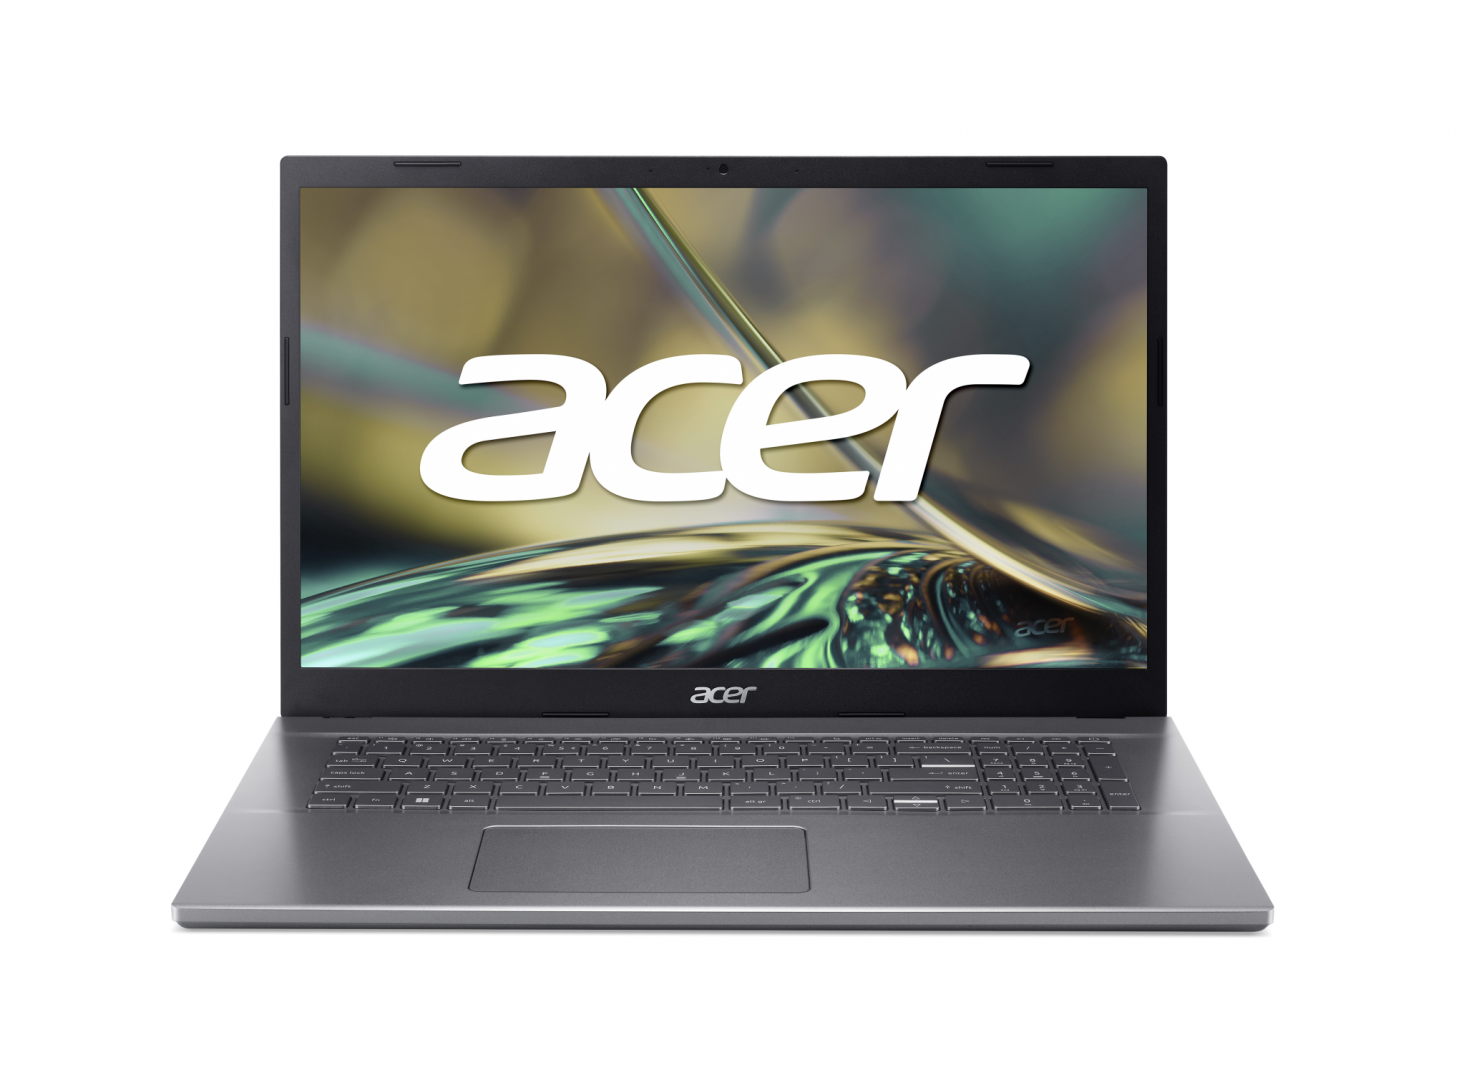 Laptop Acer Aspire 5 A517-53, 17.3" display with IPS (In-Plane Switching) technology, Full HD 1920 x 1080, Acer ComfyView™ LED-backlit TFT LCD, 16:9 aspect ratio, 45% NTSC color gamut, Wide viewing angle up to 170 degrees, Mercury free, environment friendly, Intel® Core™ i7-12650H, 10C (6P + 4E) /